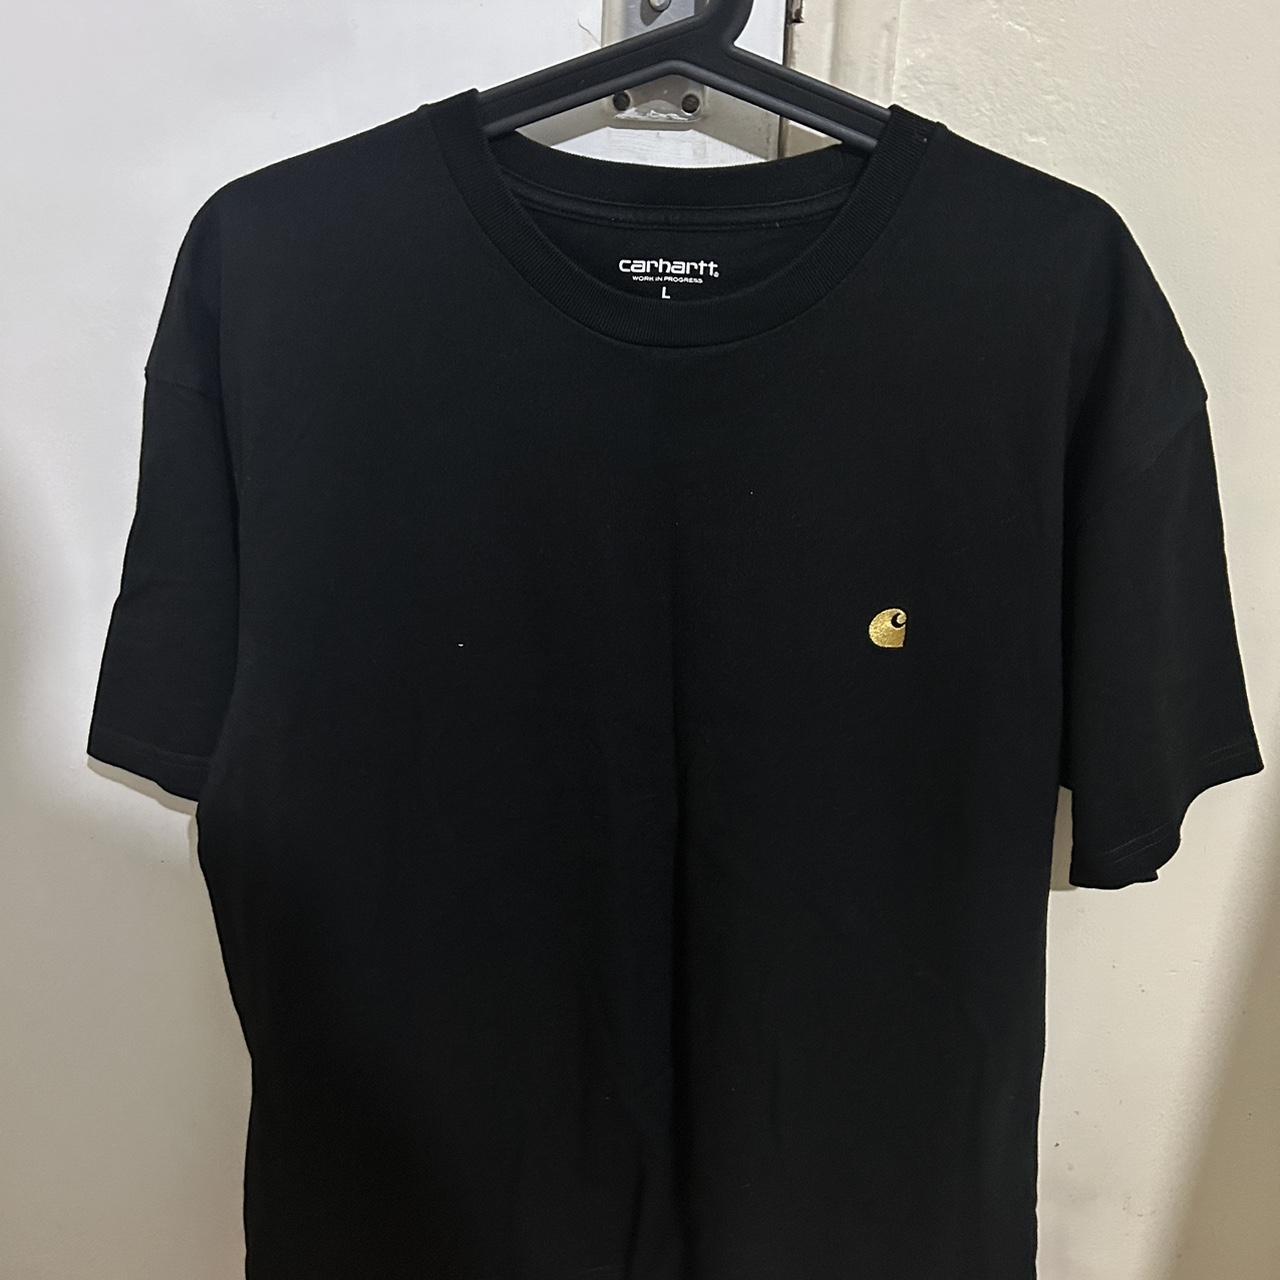 Black Carhatt T-shirt in a size large but also fits... - Depop